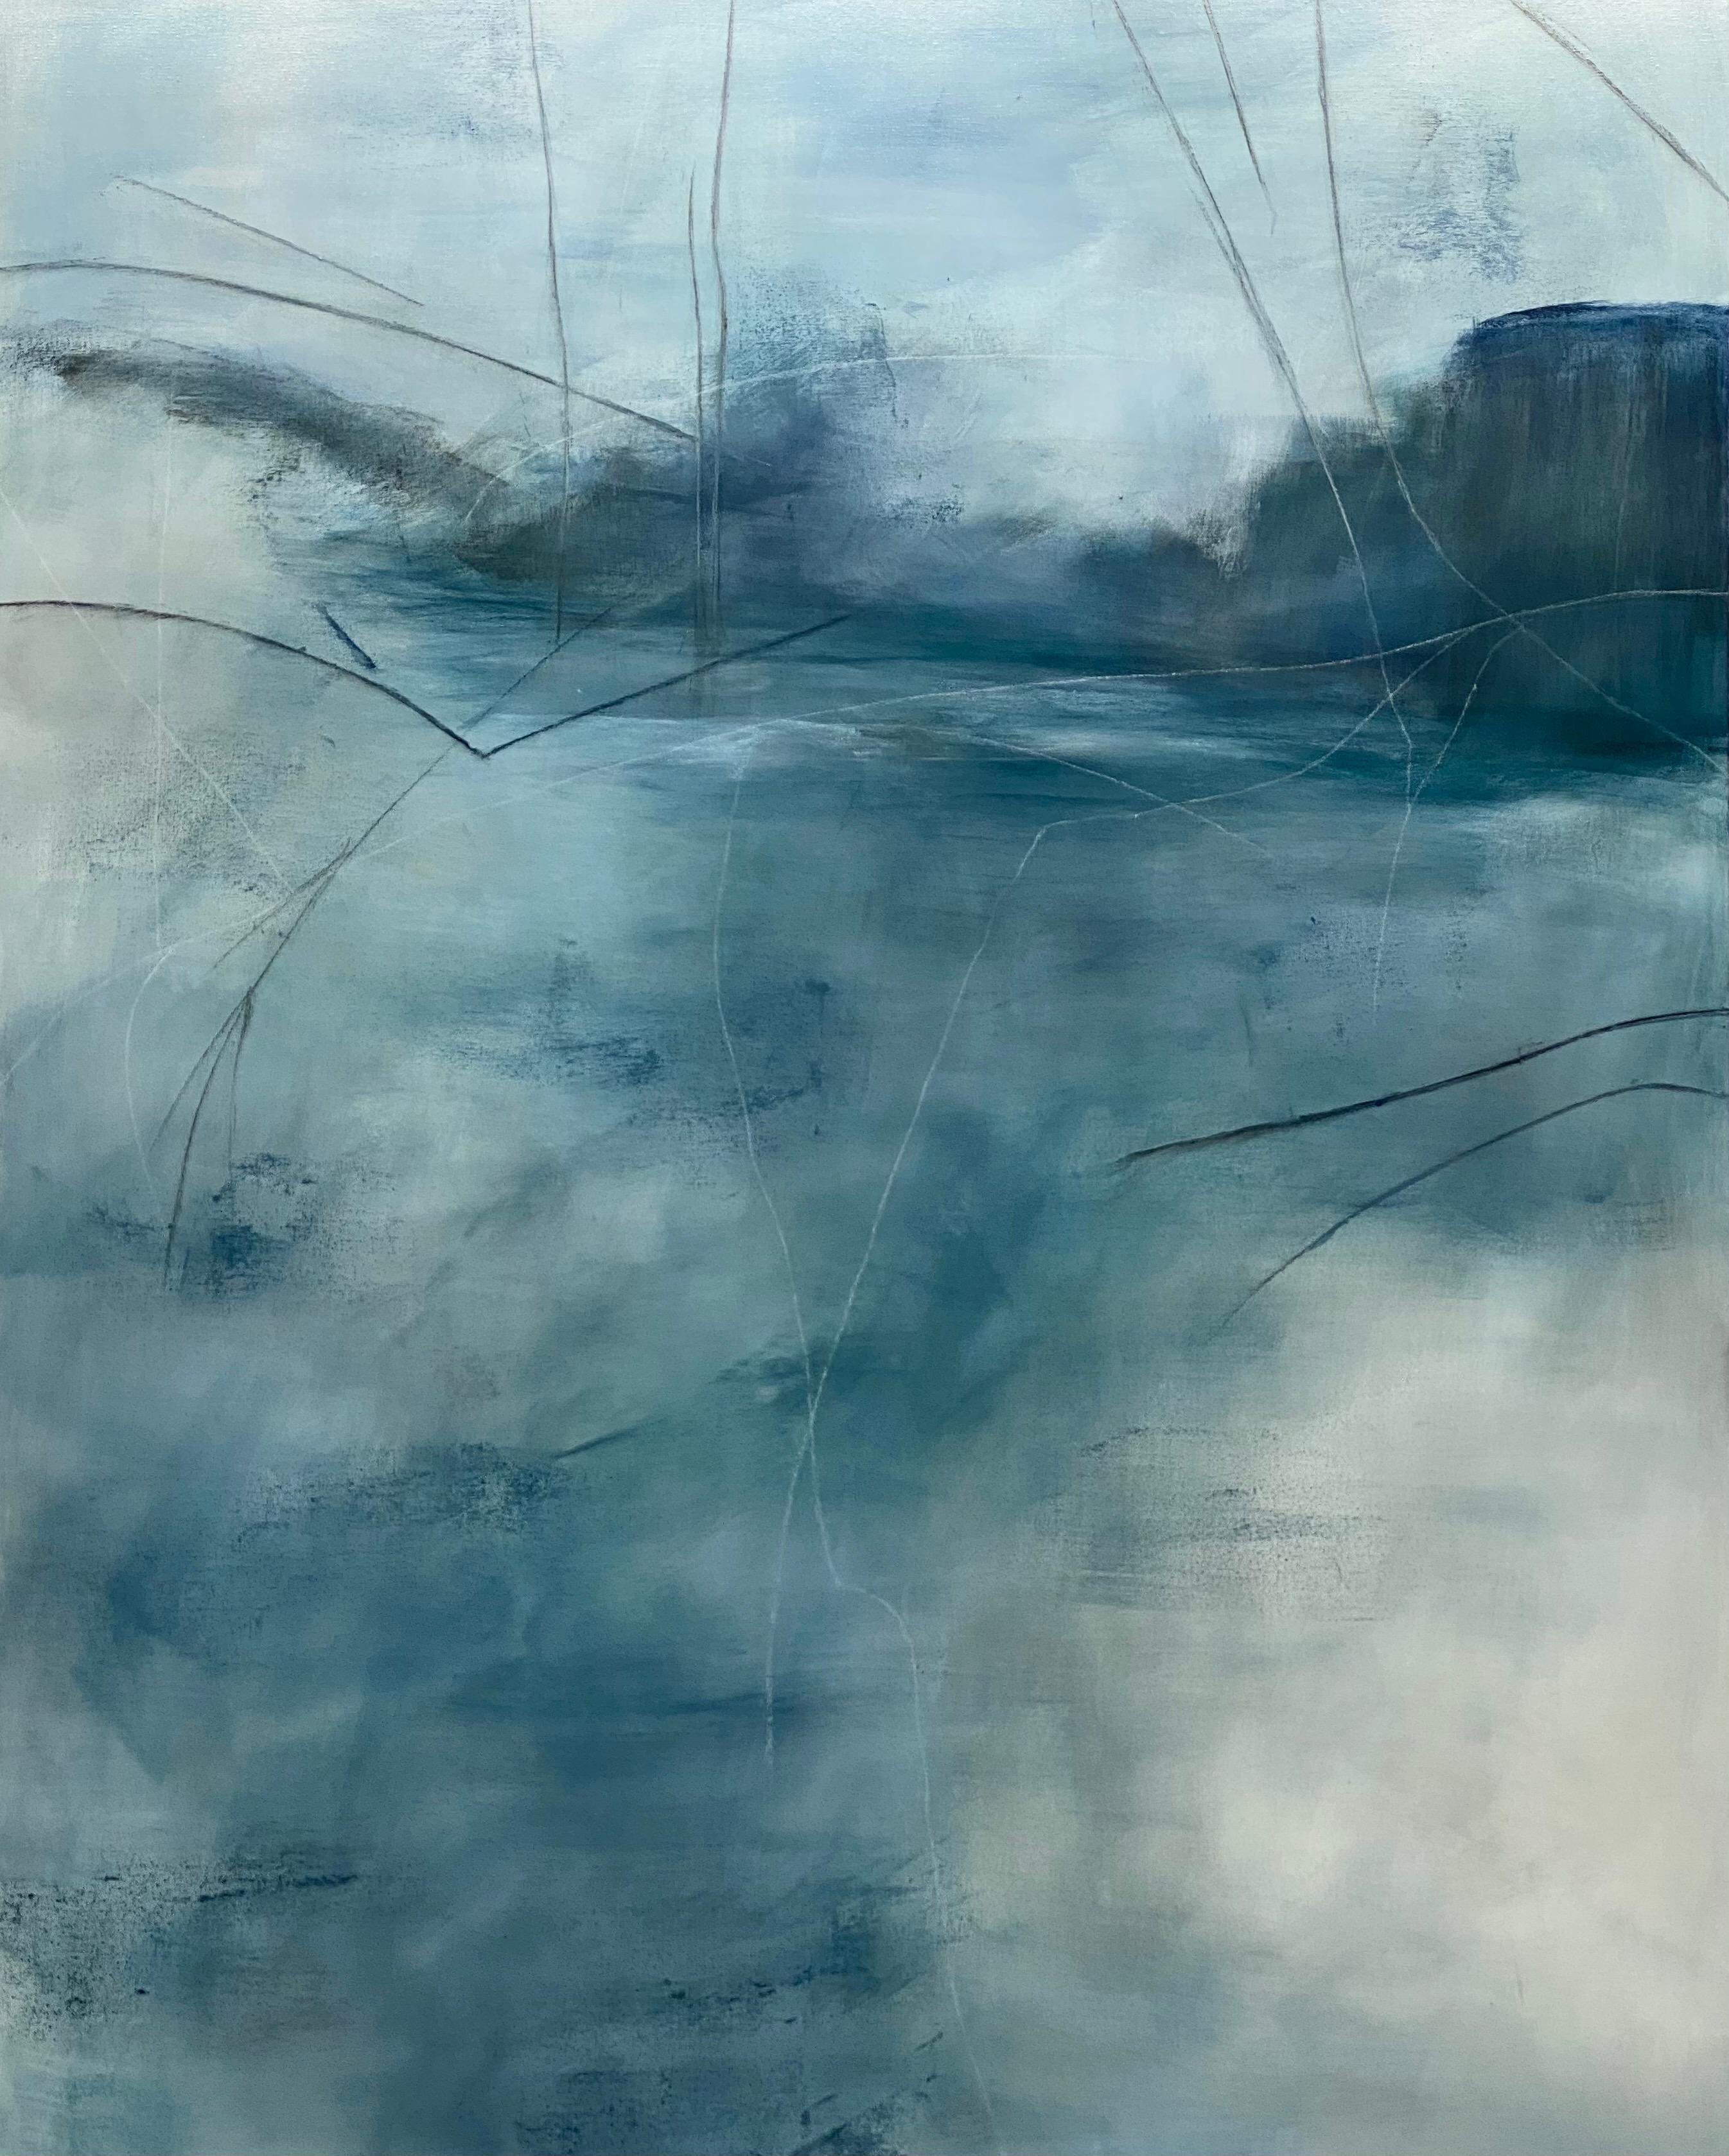 Juanita Bellavance  Abstract Painting - Sense of spirit, From the Chestatee River portfolio, contemporary water, blue